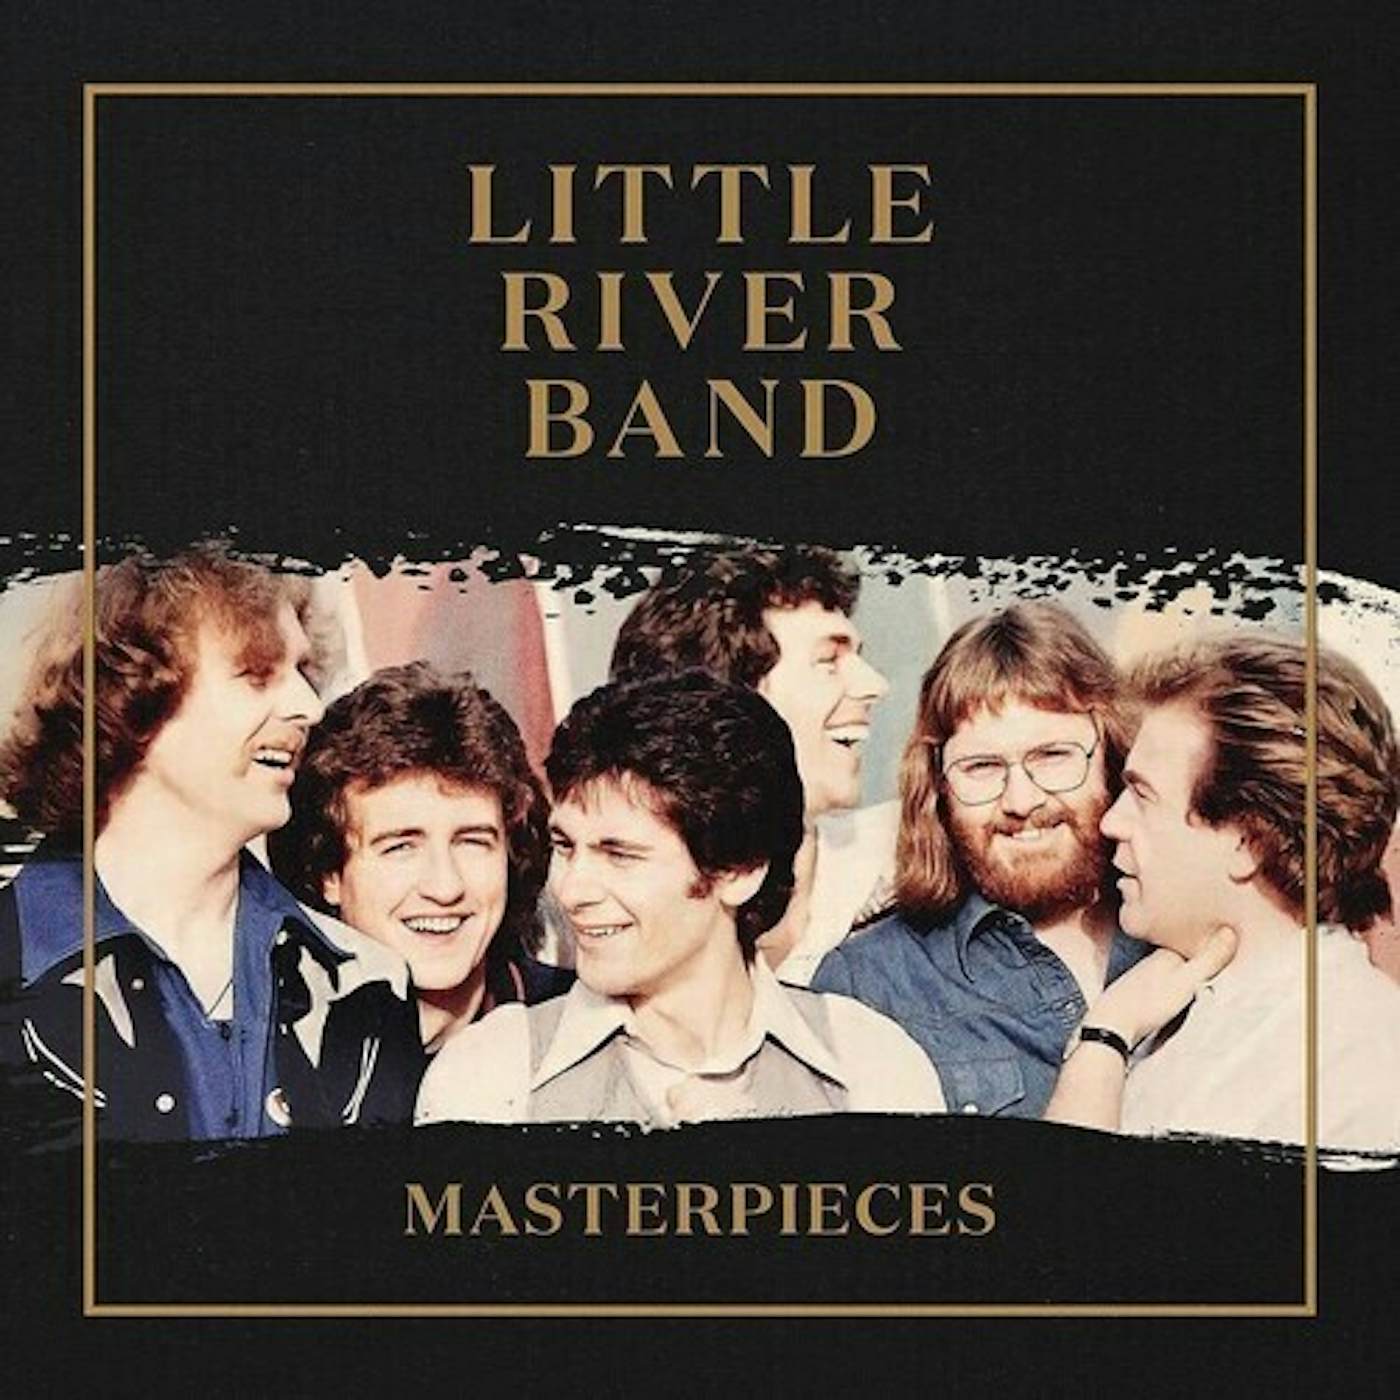 Little River Band MASTERPIECES CD